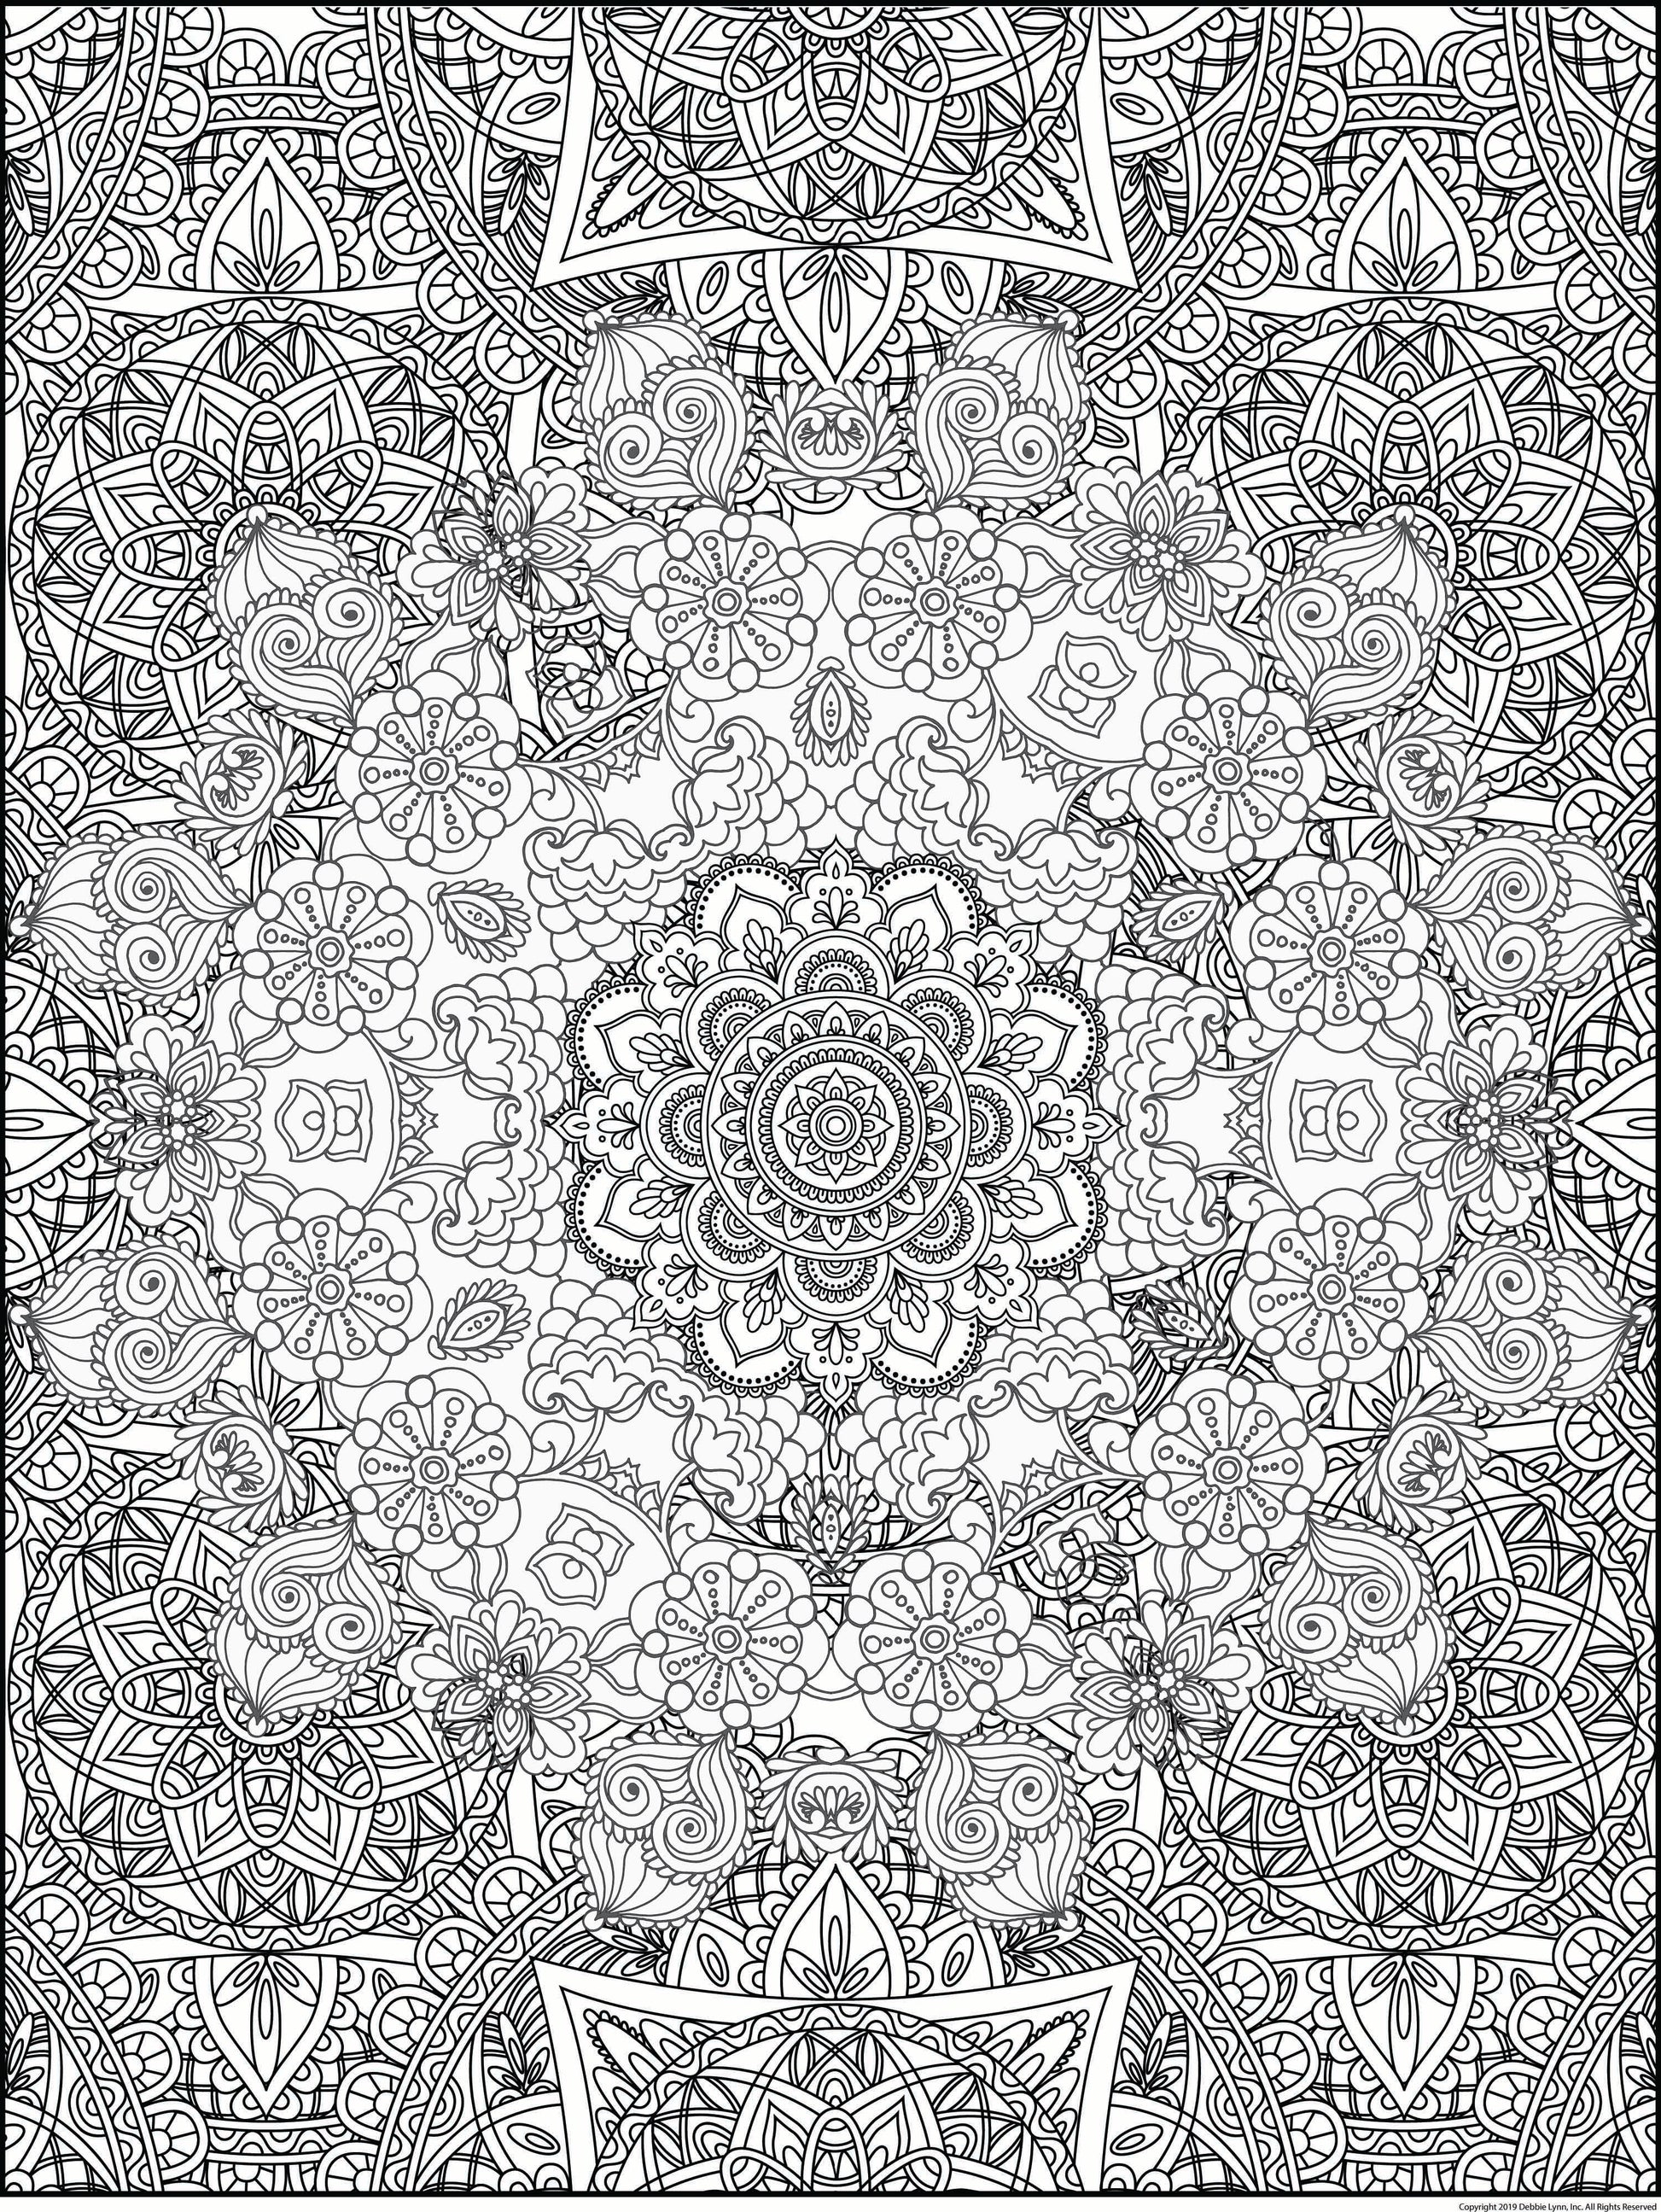 Mandala Giant Coloring Posters for Kids Adults Coloring Sheets Sloth